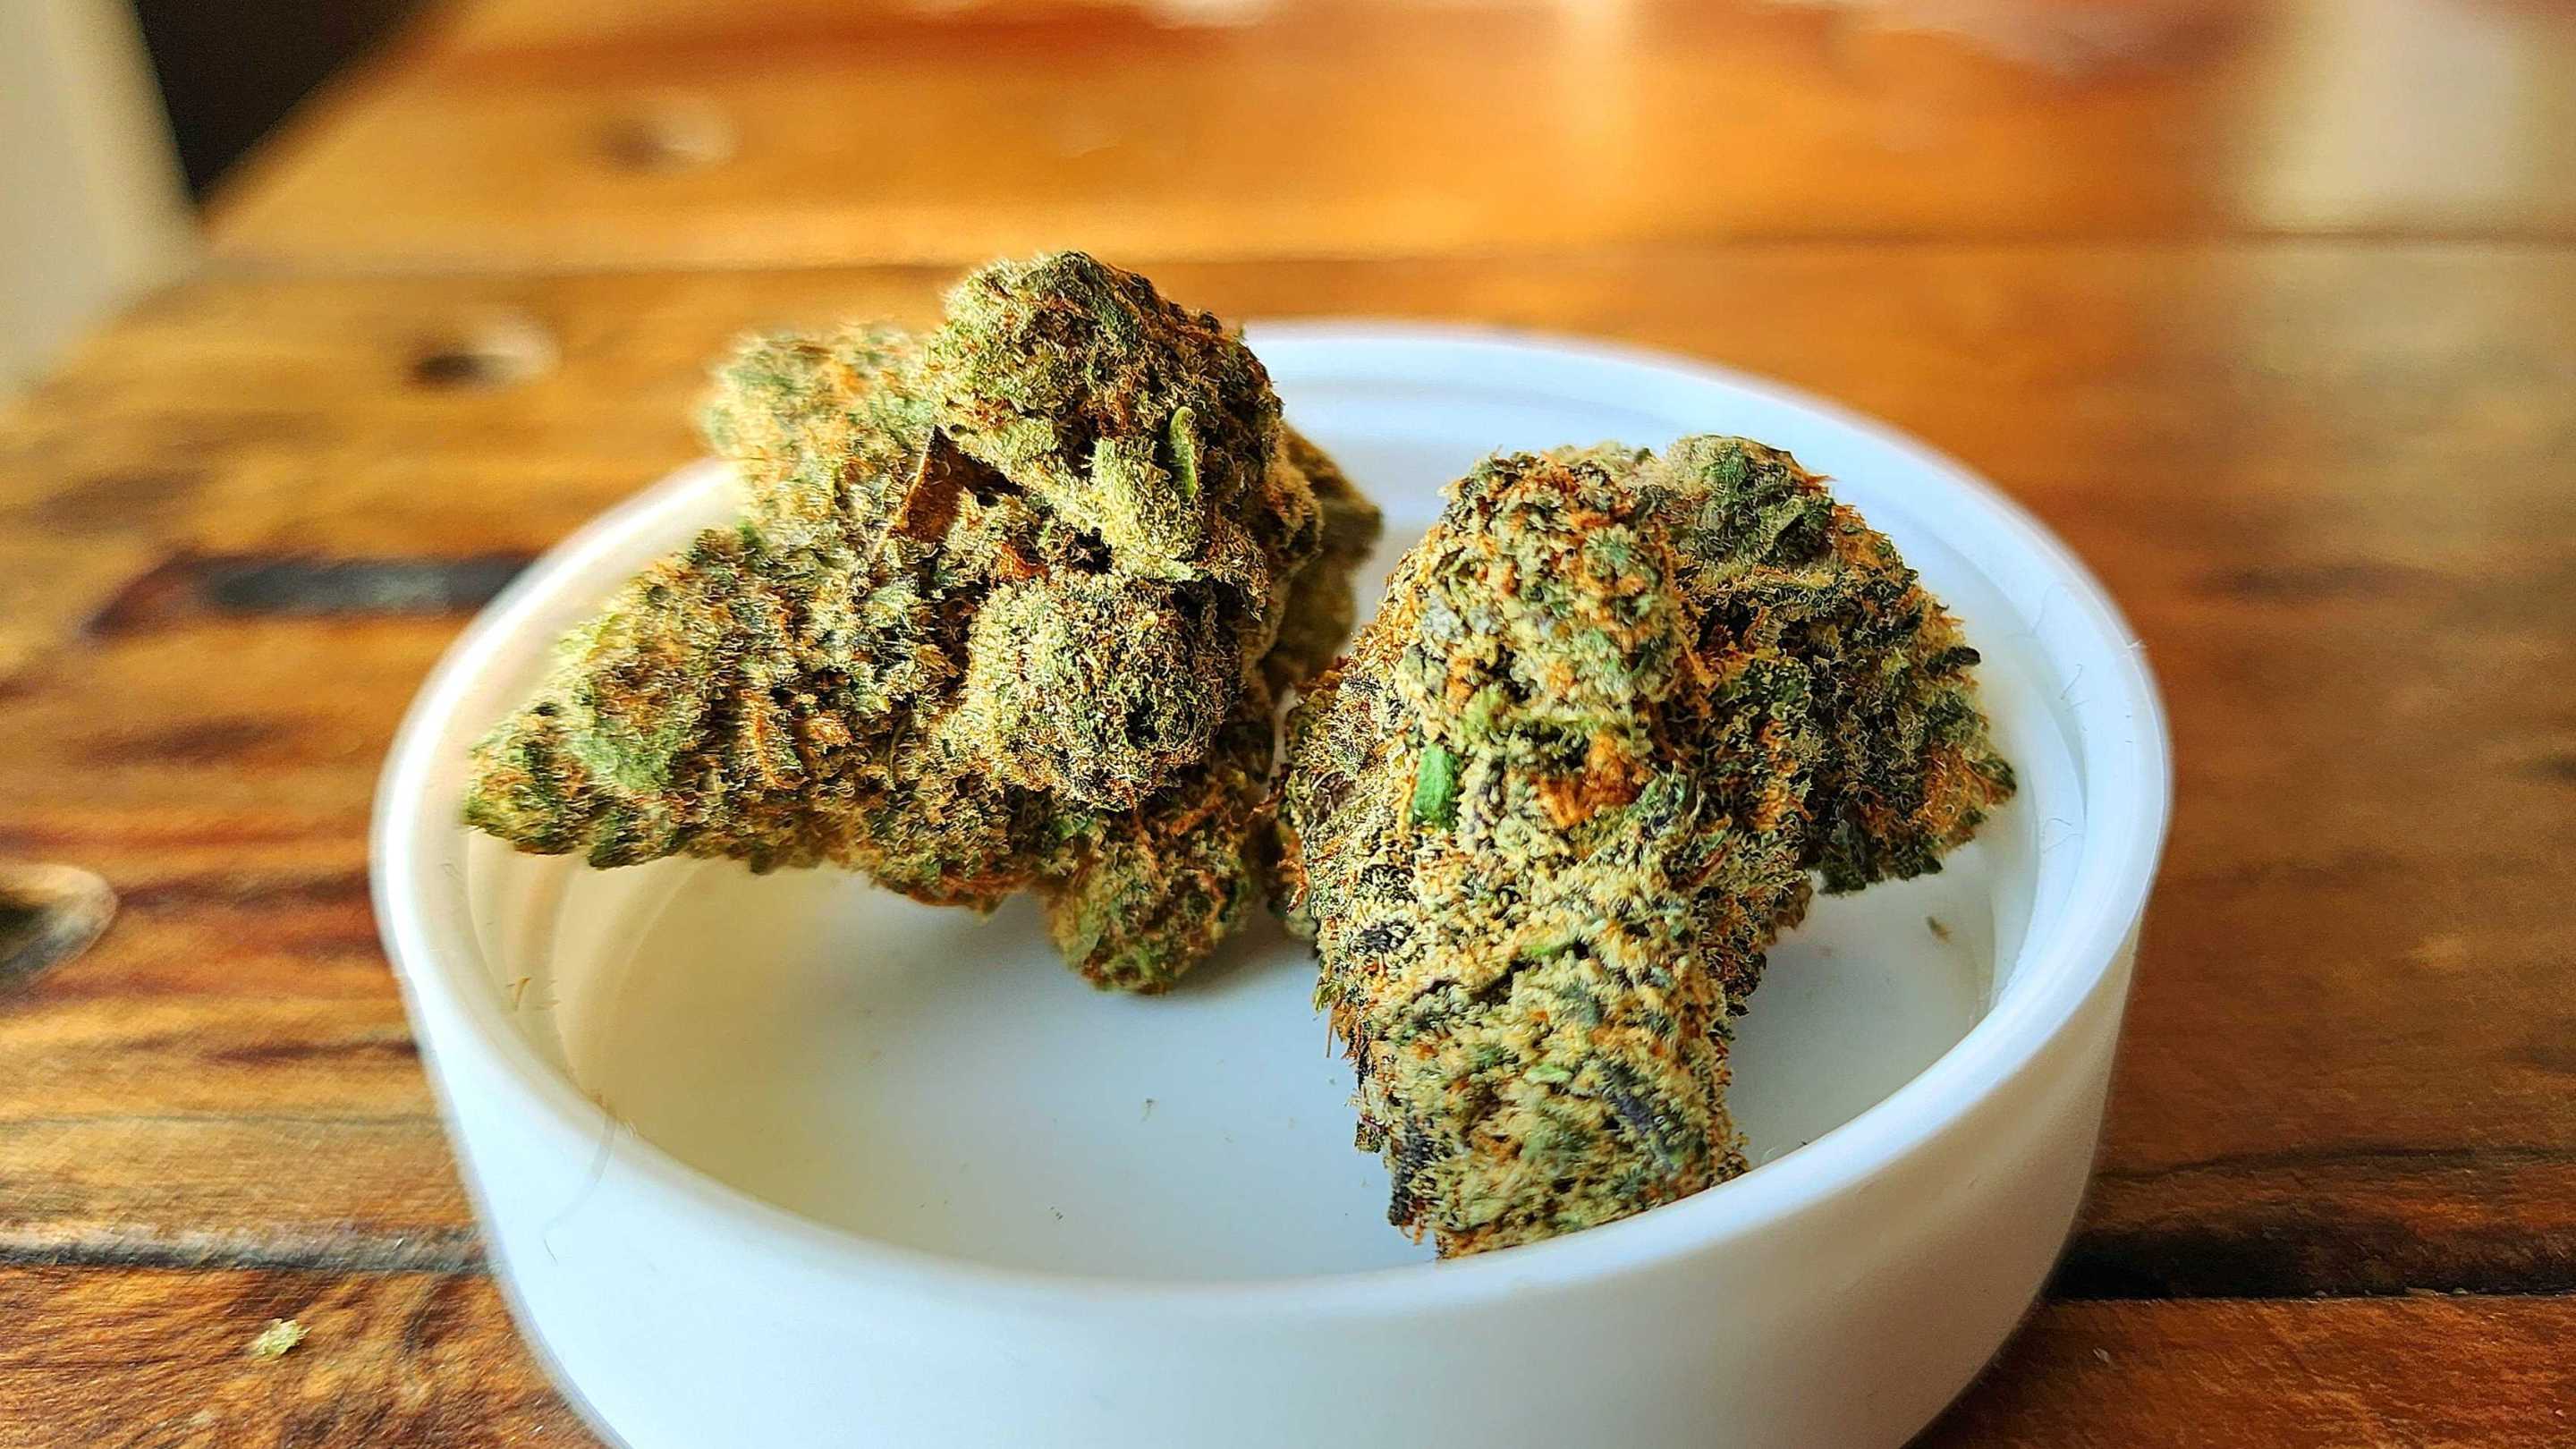 Two frosty looking nugs of Lemon Drop sit on top of a plastic container.